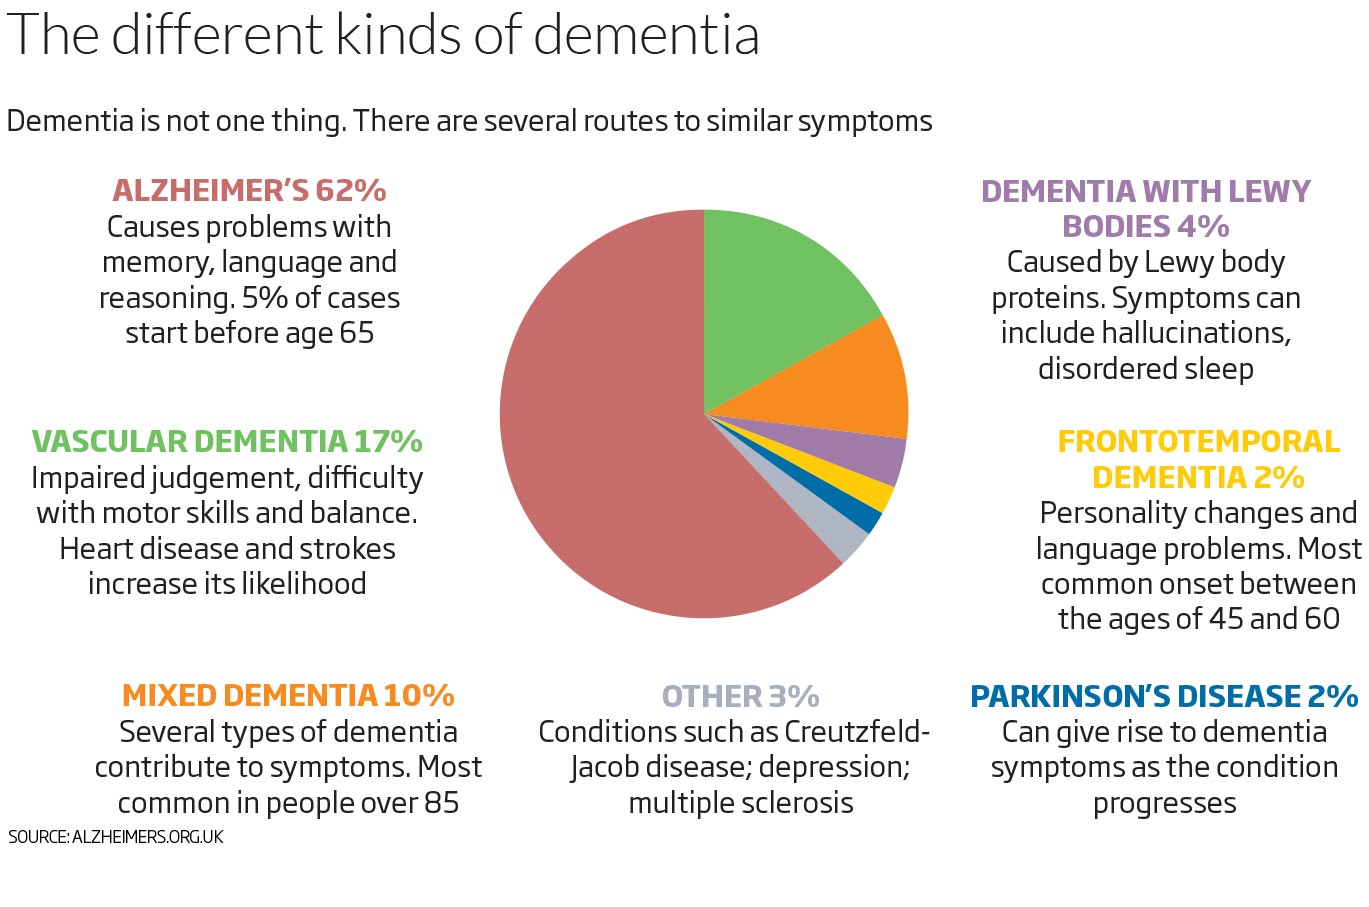 What are common early signs of dementia?